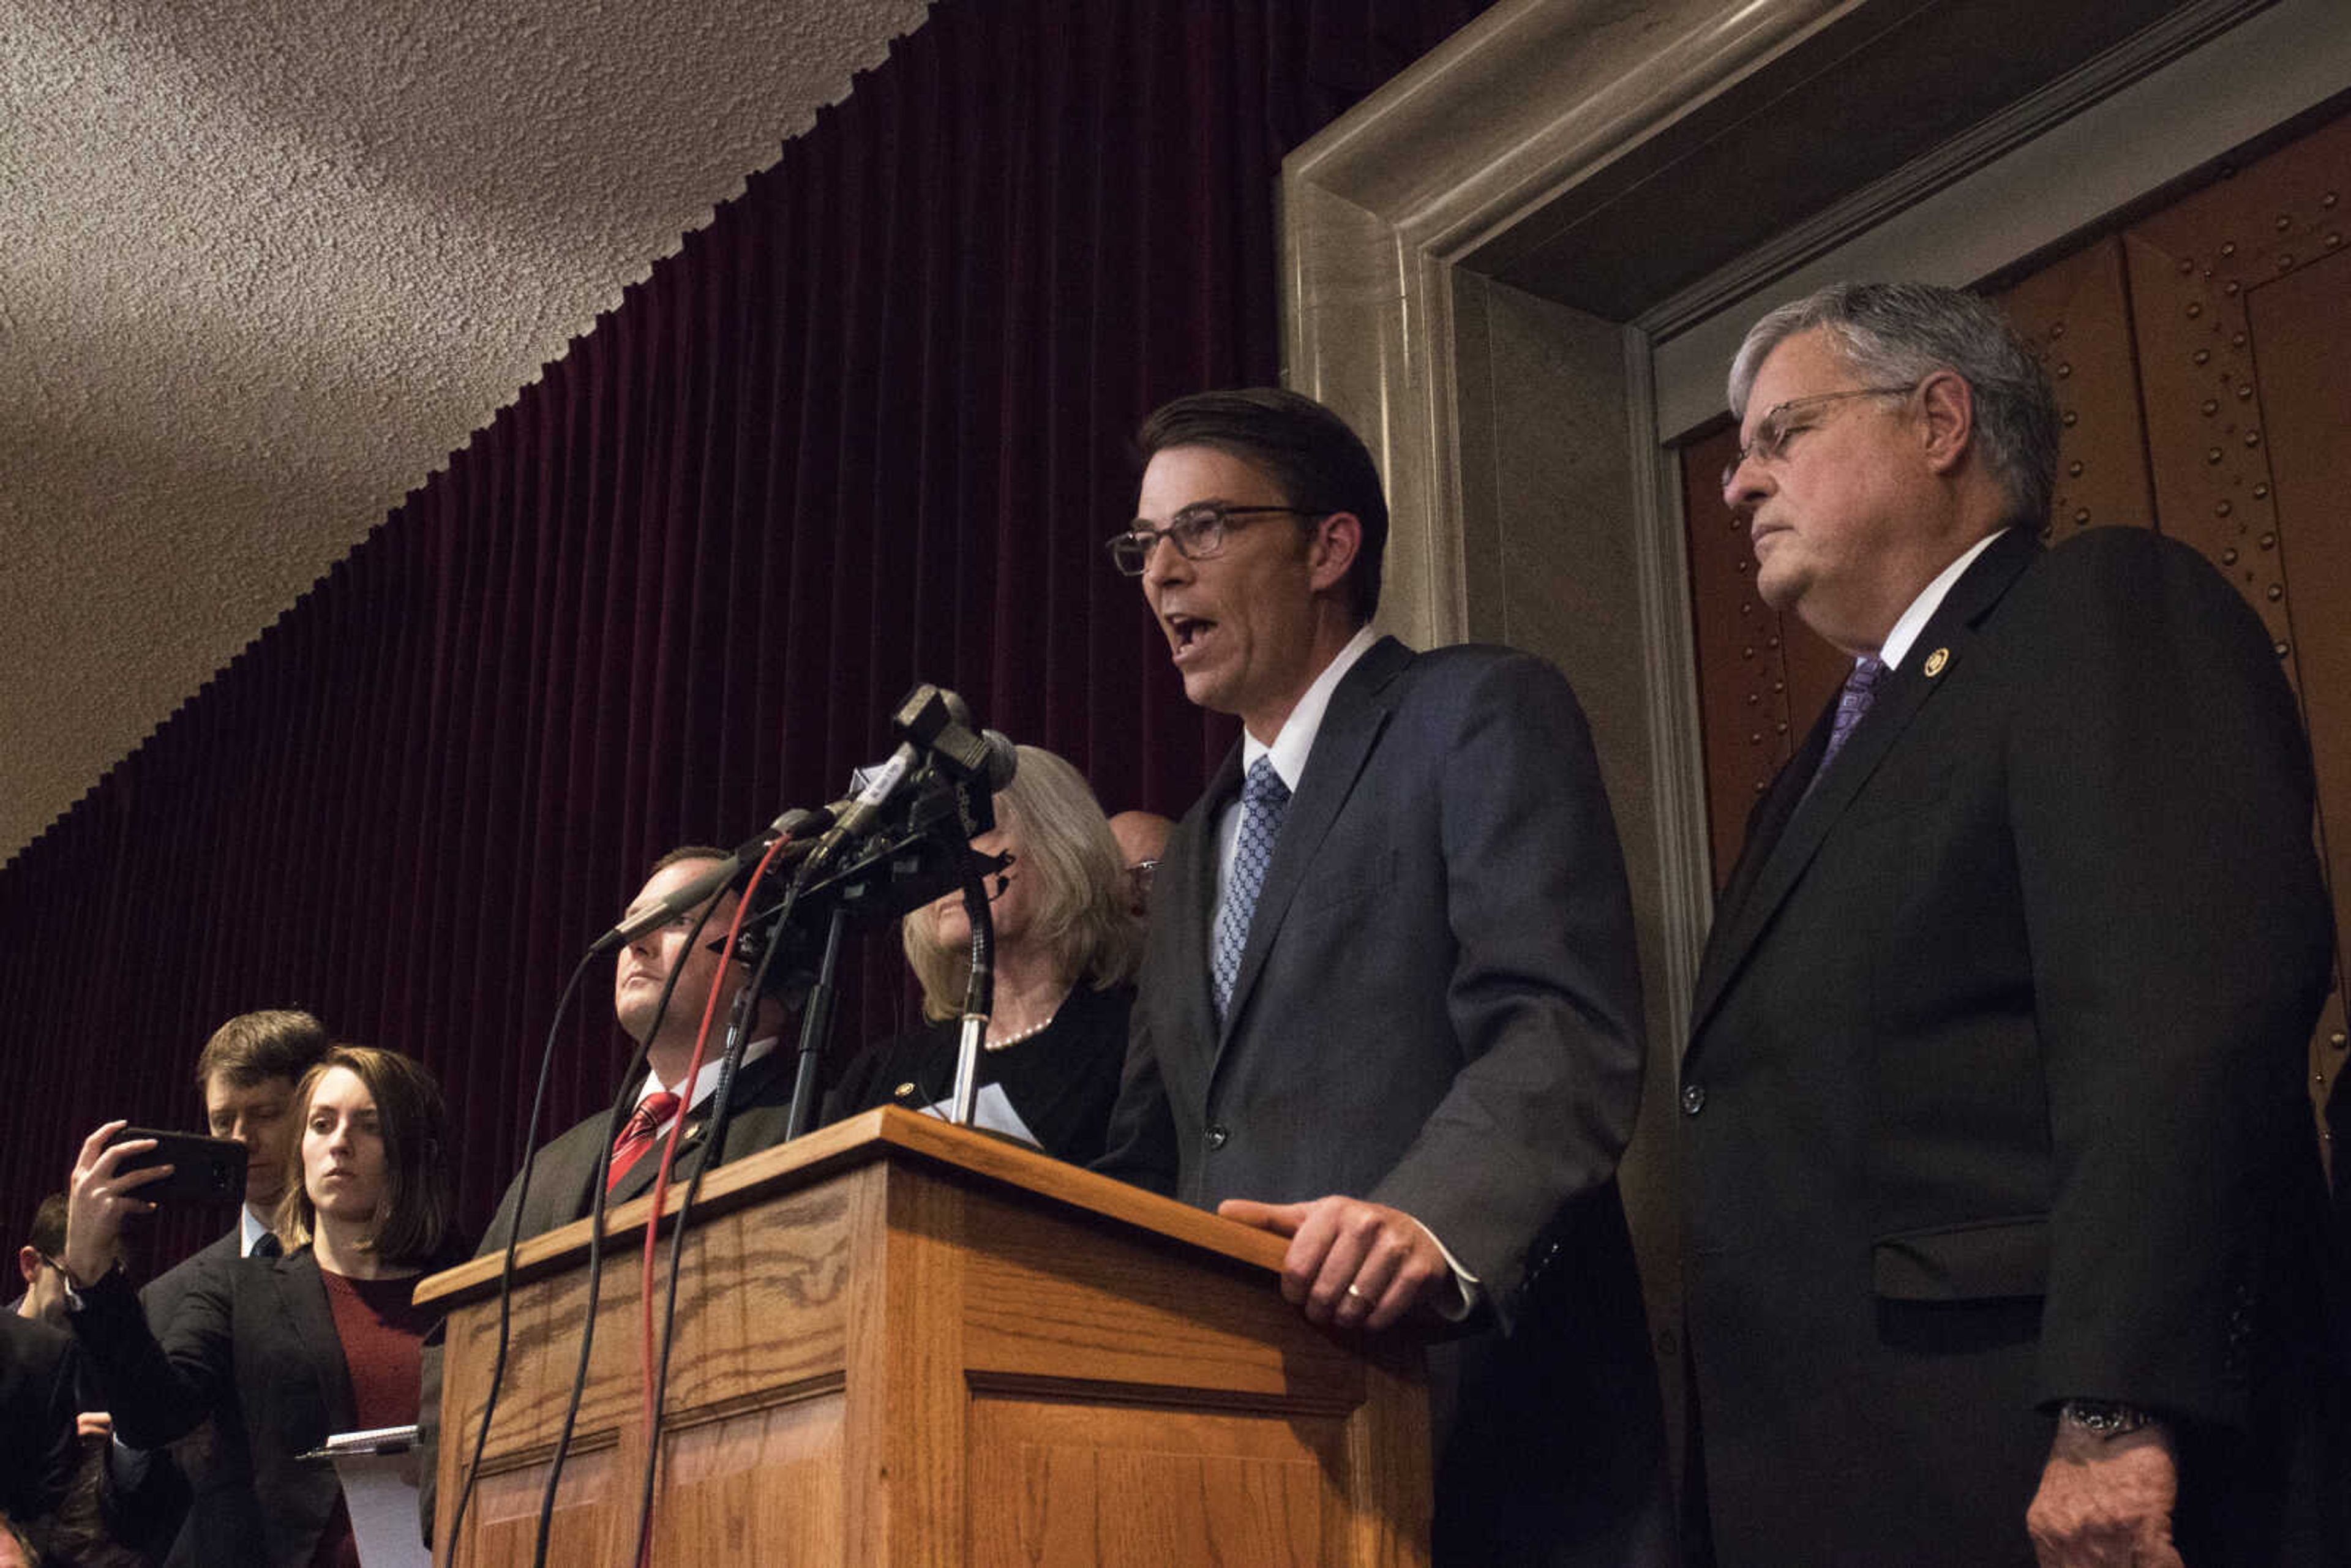 Speaker of the House Todd Richardson and members of the Missouri House of Representatives Special Investigative Committee on Oversight speak at a press conference to address the Committee's report on the House Floor on April 11.